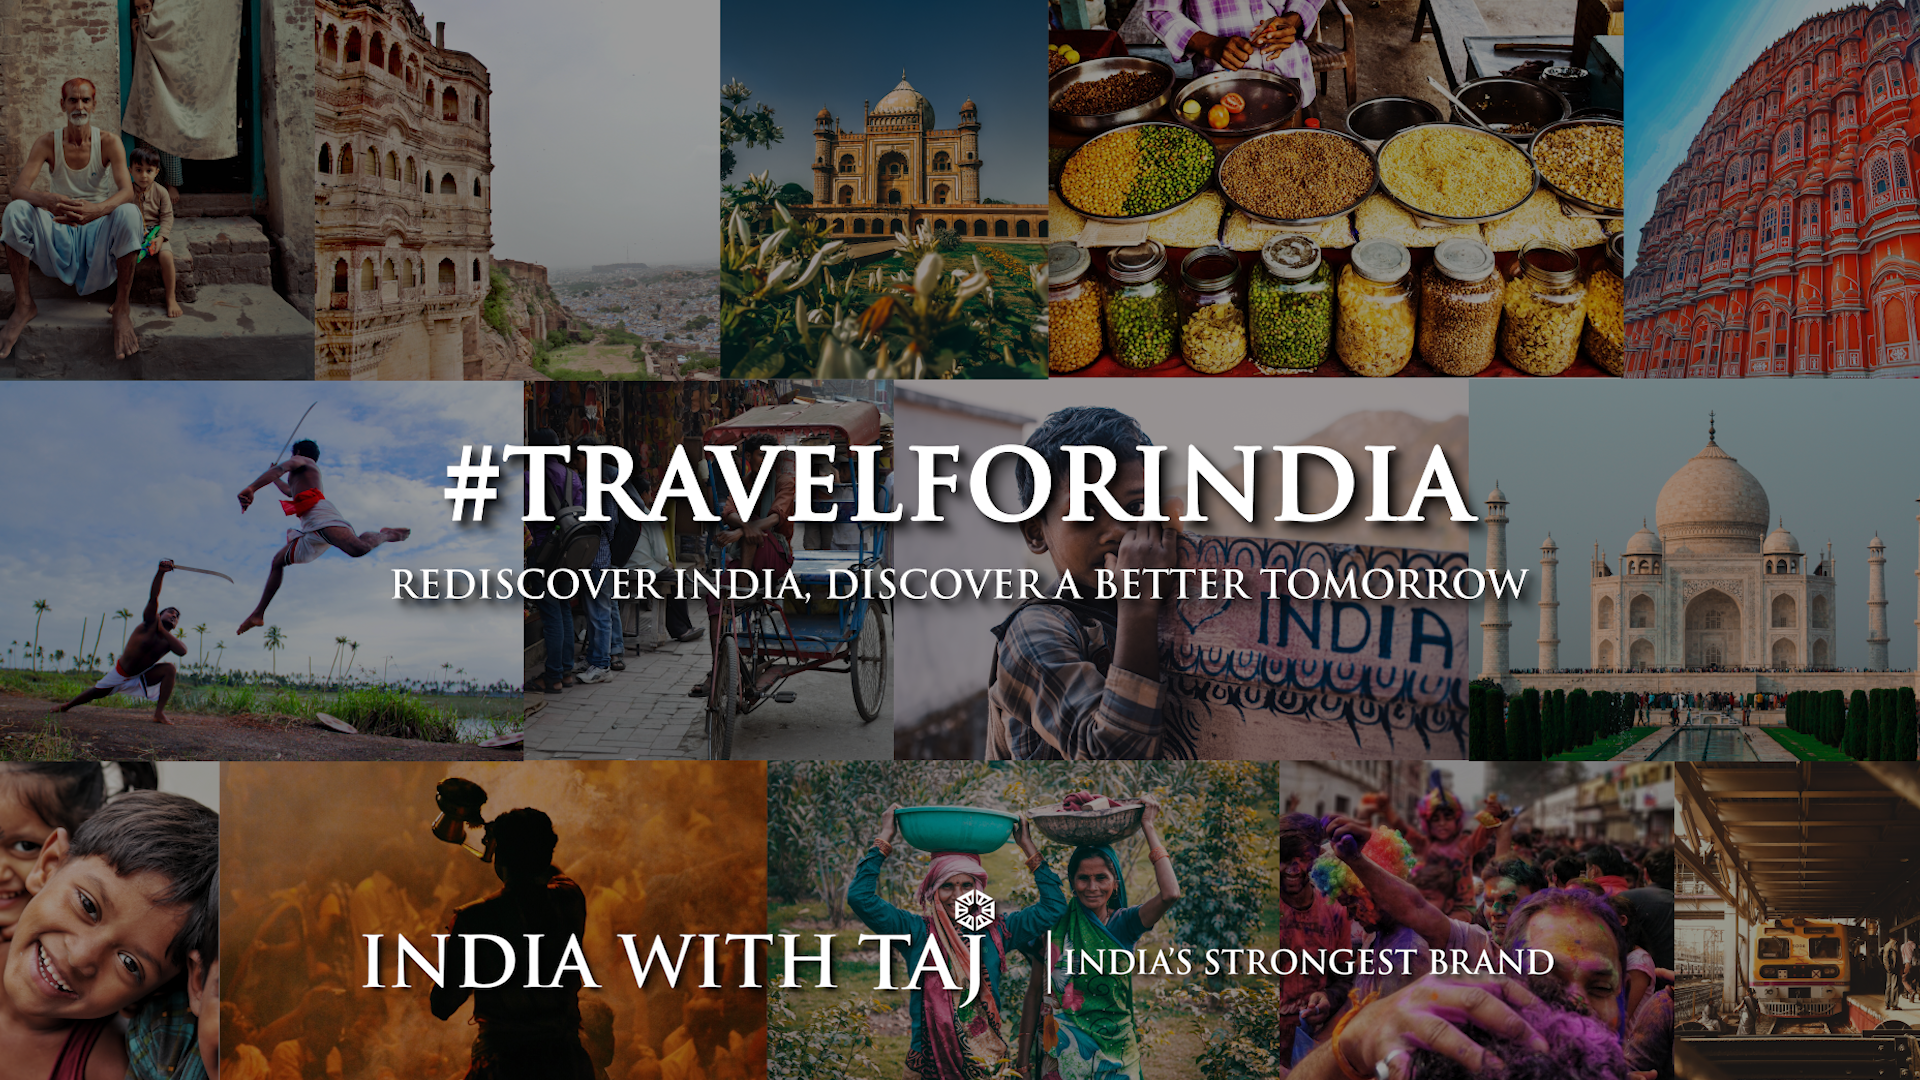 Travel  for India  – An initiative by  IHCL on  World Tourism day